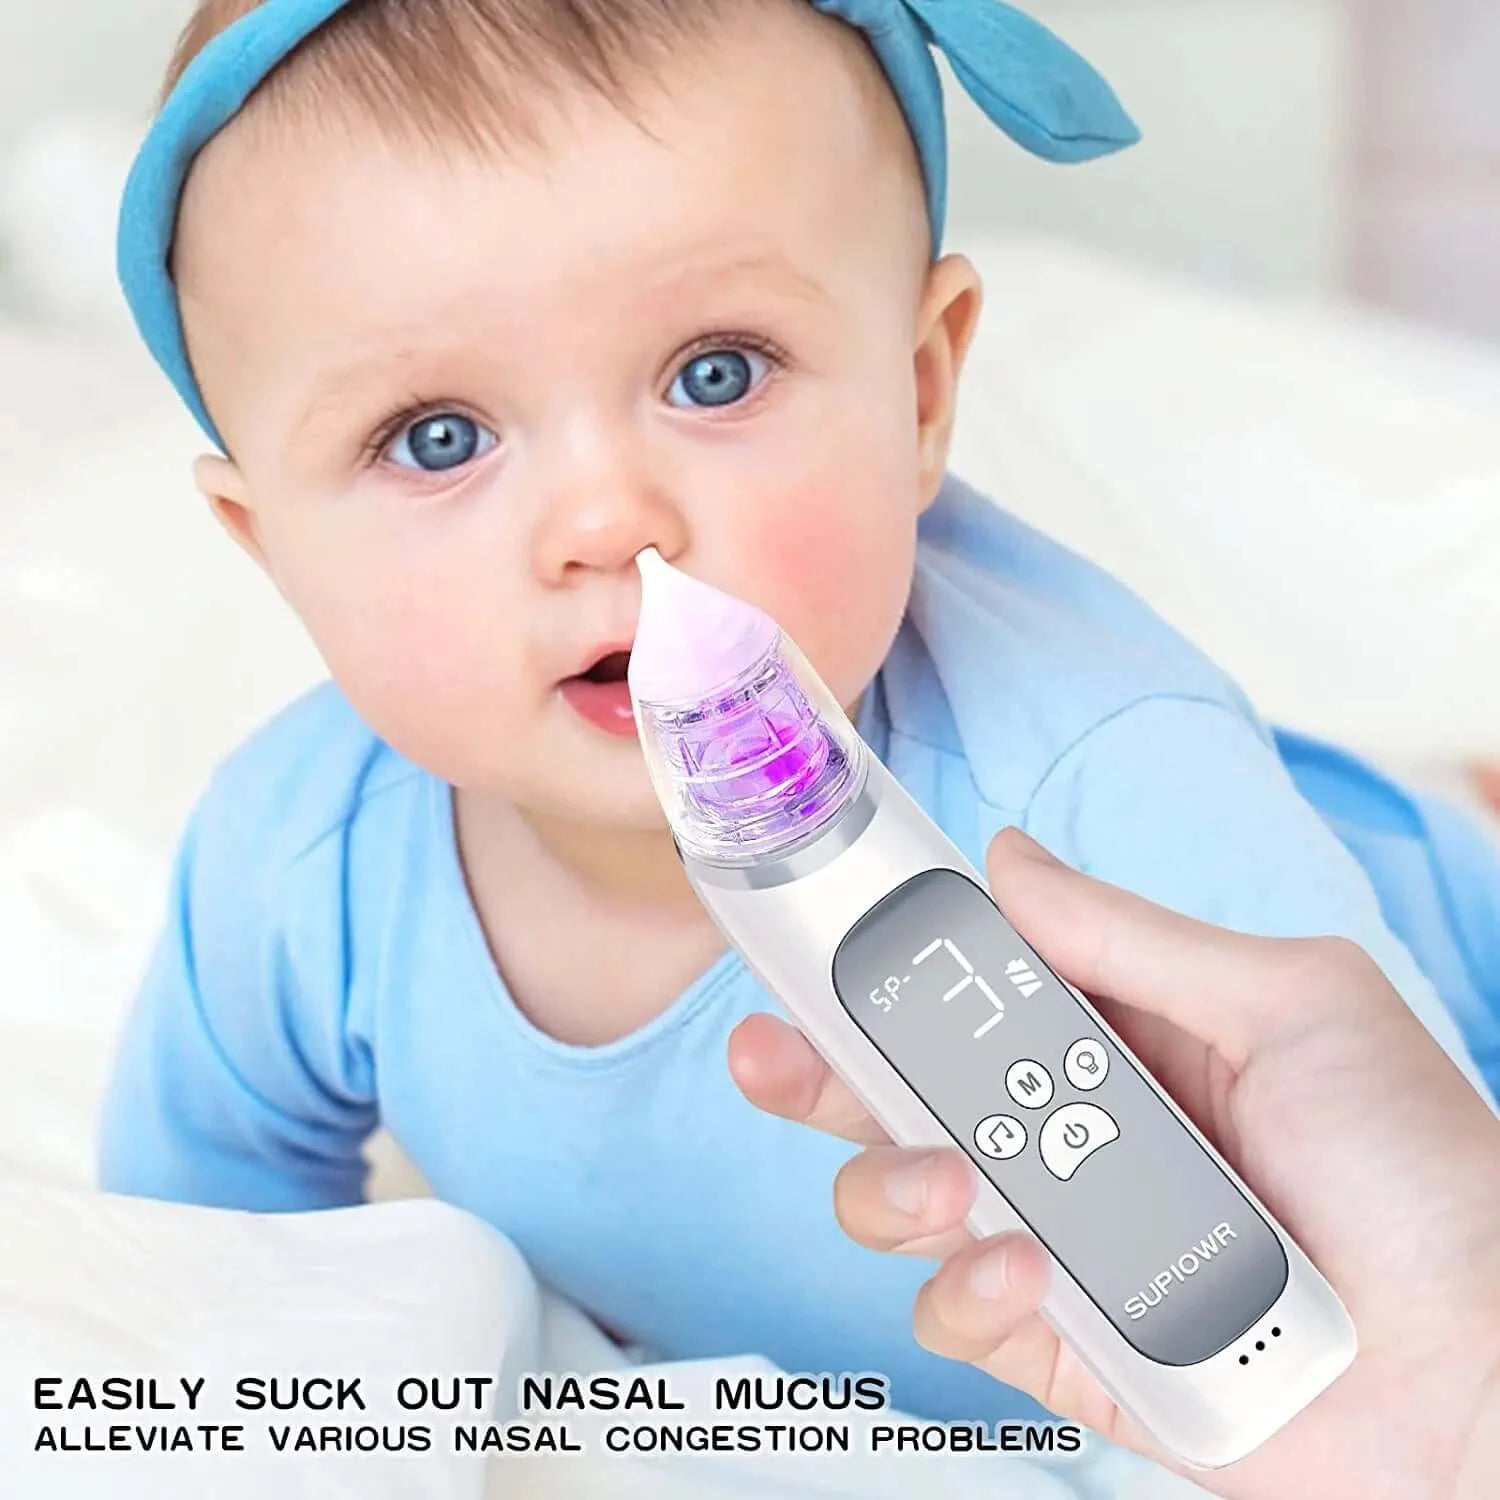 Image of OleOle Nasal Aspirator with baby girl: Gentle and Effective Infant Nose Suction for Congestion Relief